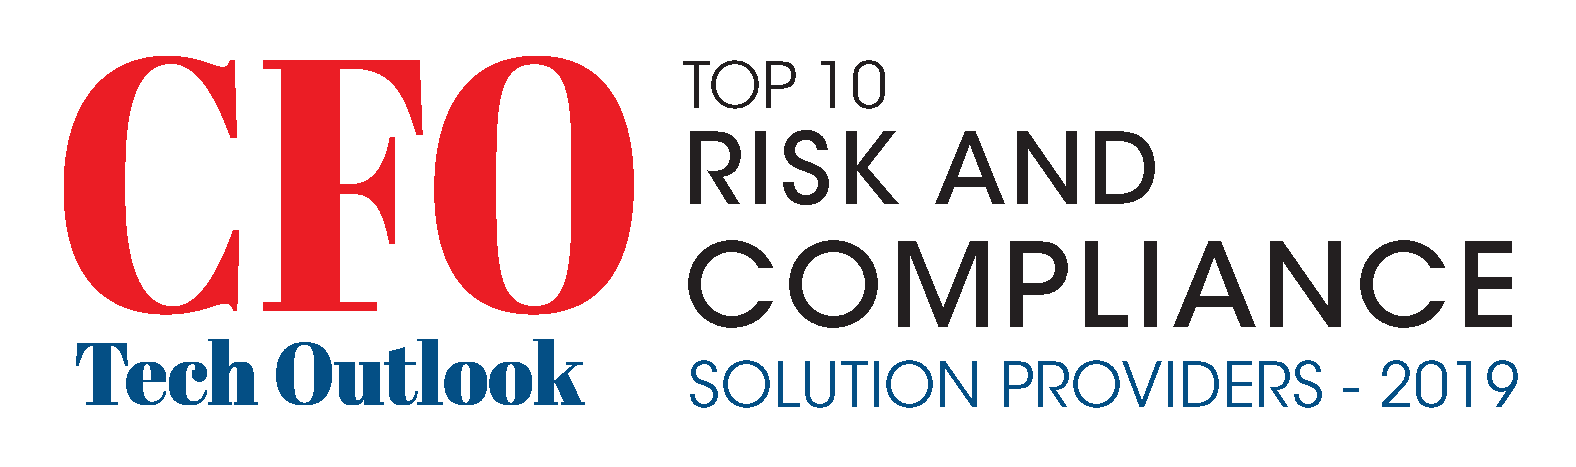 Top 10 Risk and Compliance Solution Providers - 2019 logo